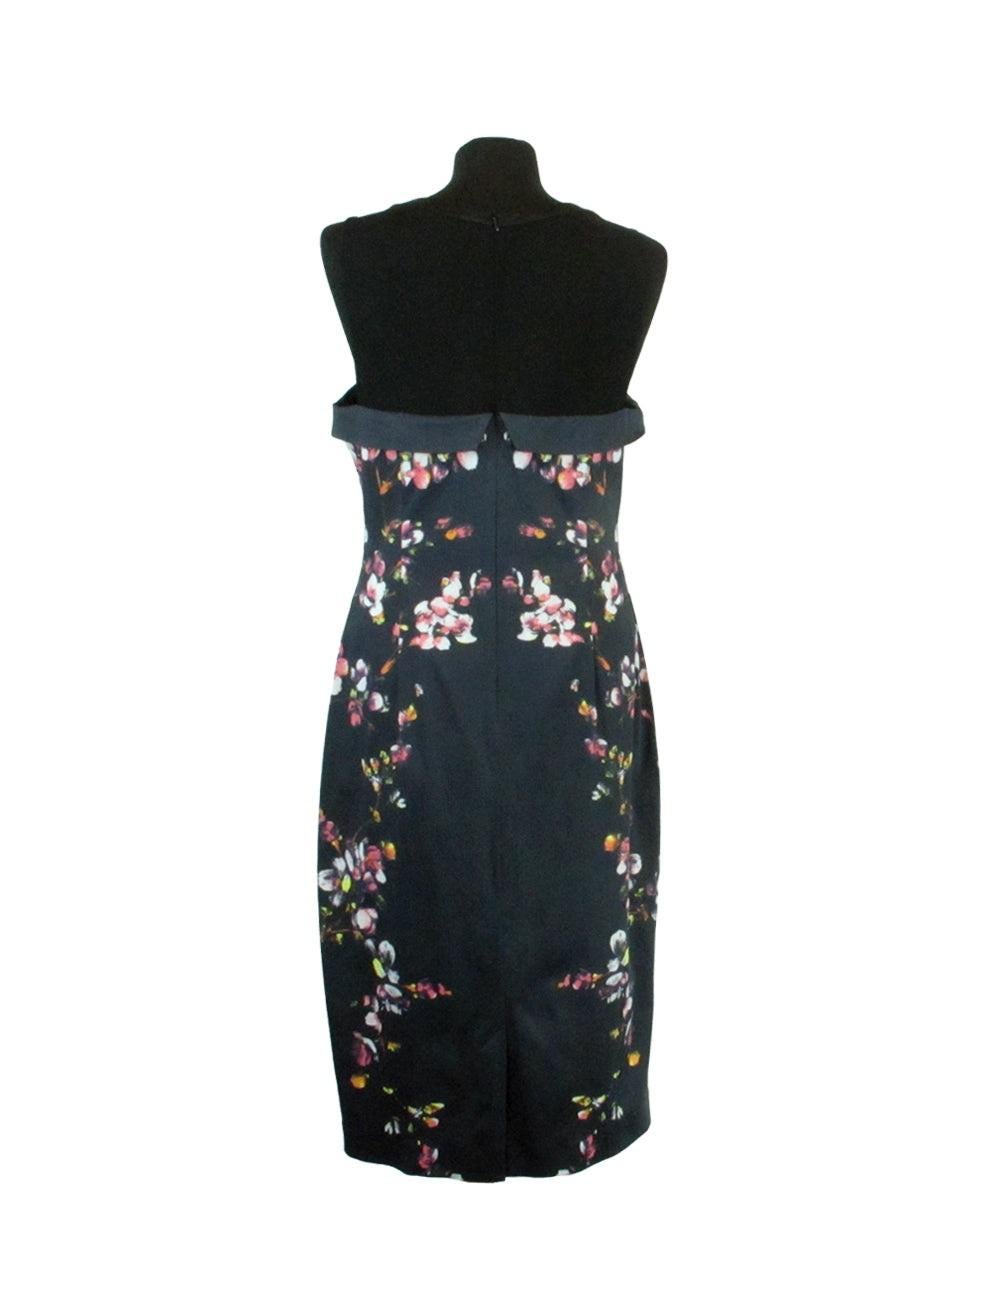 Floral Black a-line Dress Collar Detail.

Additional information:
Material: 71% Acetate / 26% Polyamide / 3% Elastane 
Features: Floral print, Back zipper
Size: UK 16
Overall Condition: Good